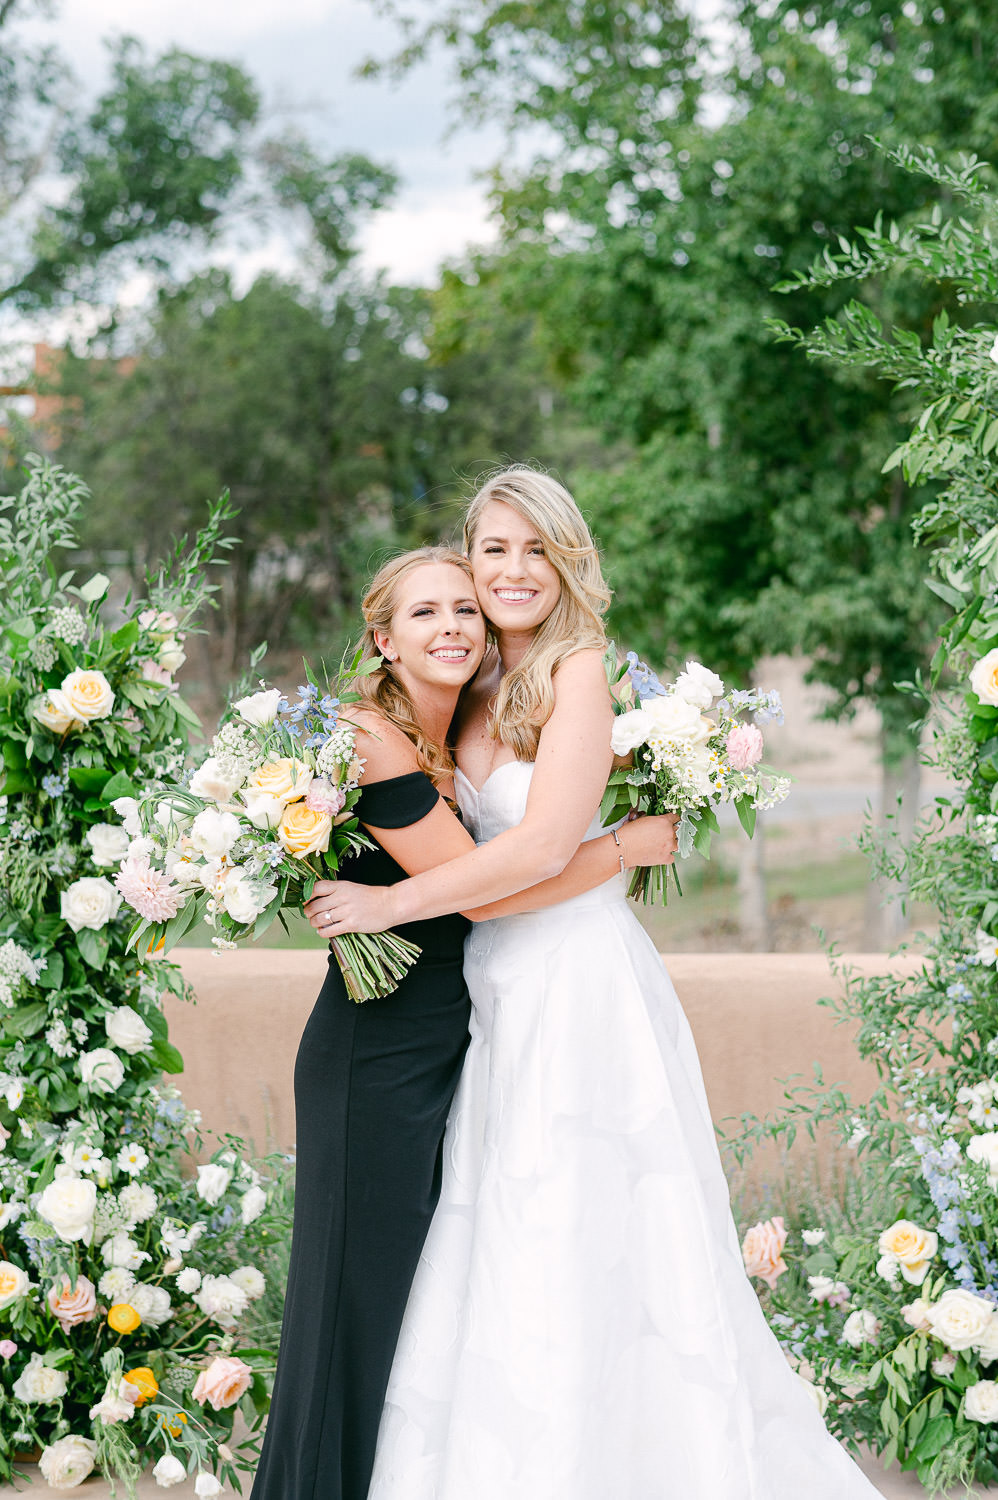 Bride and sister hug in front of a floral wedding arch.